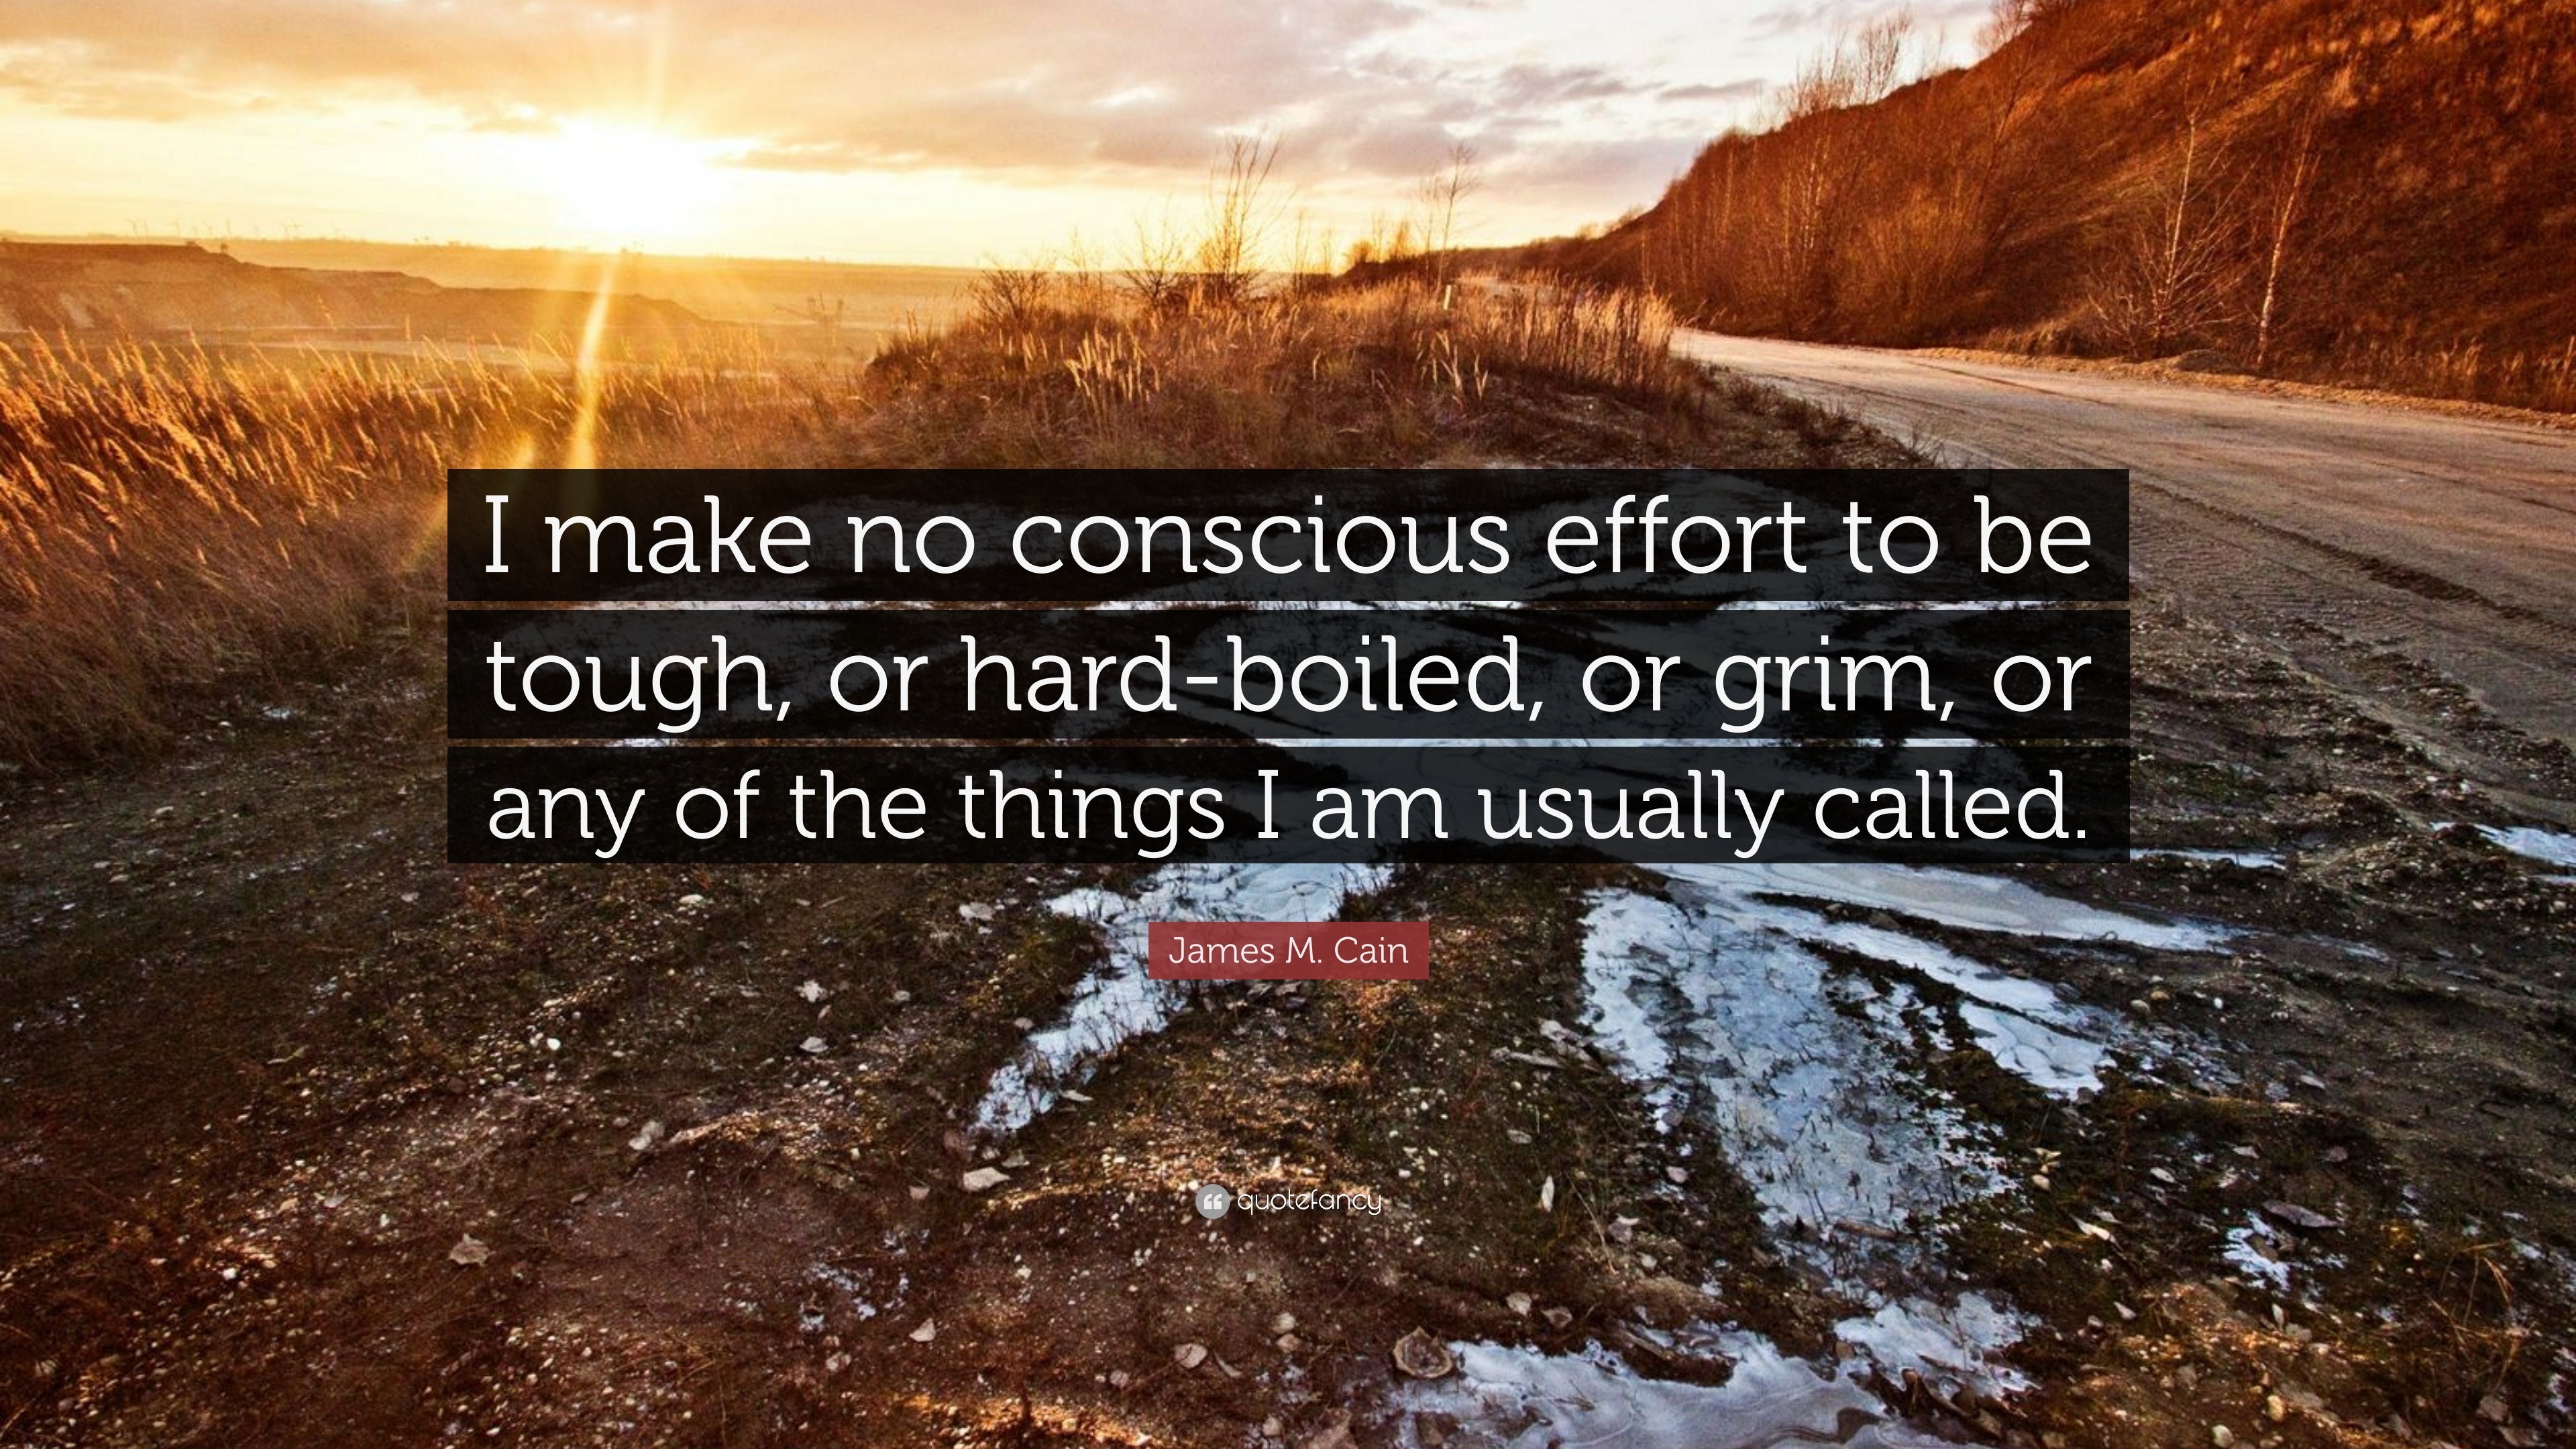 James M. Cain Quote: “I make no conscious effort to be tough, or hard ...